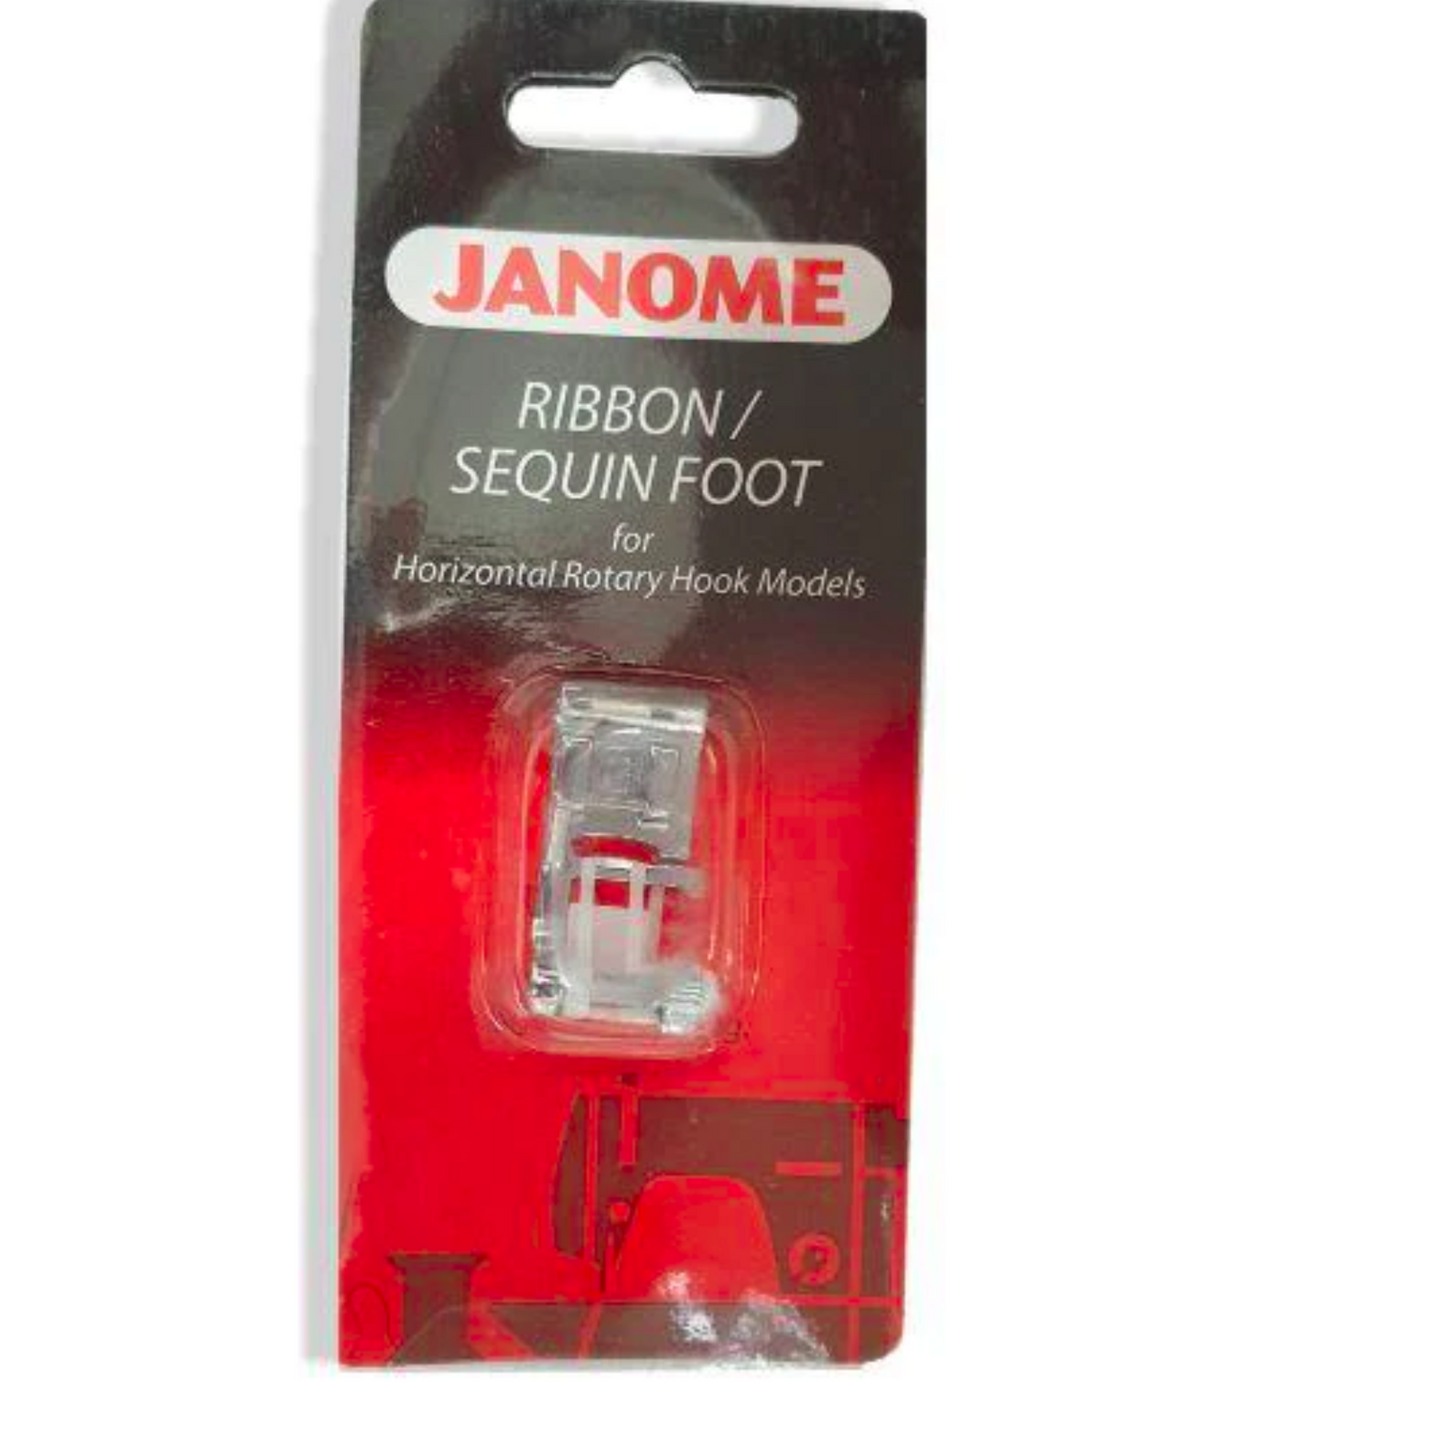 Janome - Ribbon/sequin foot - Silver - Packet